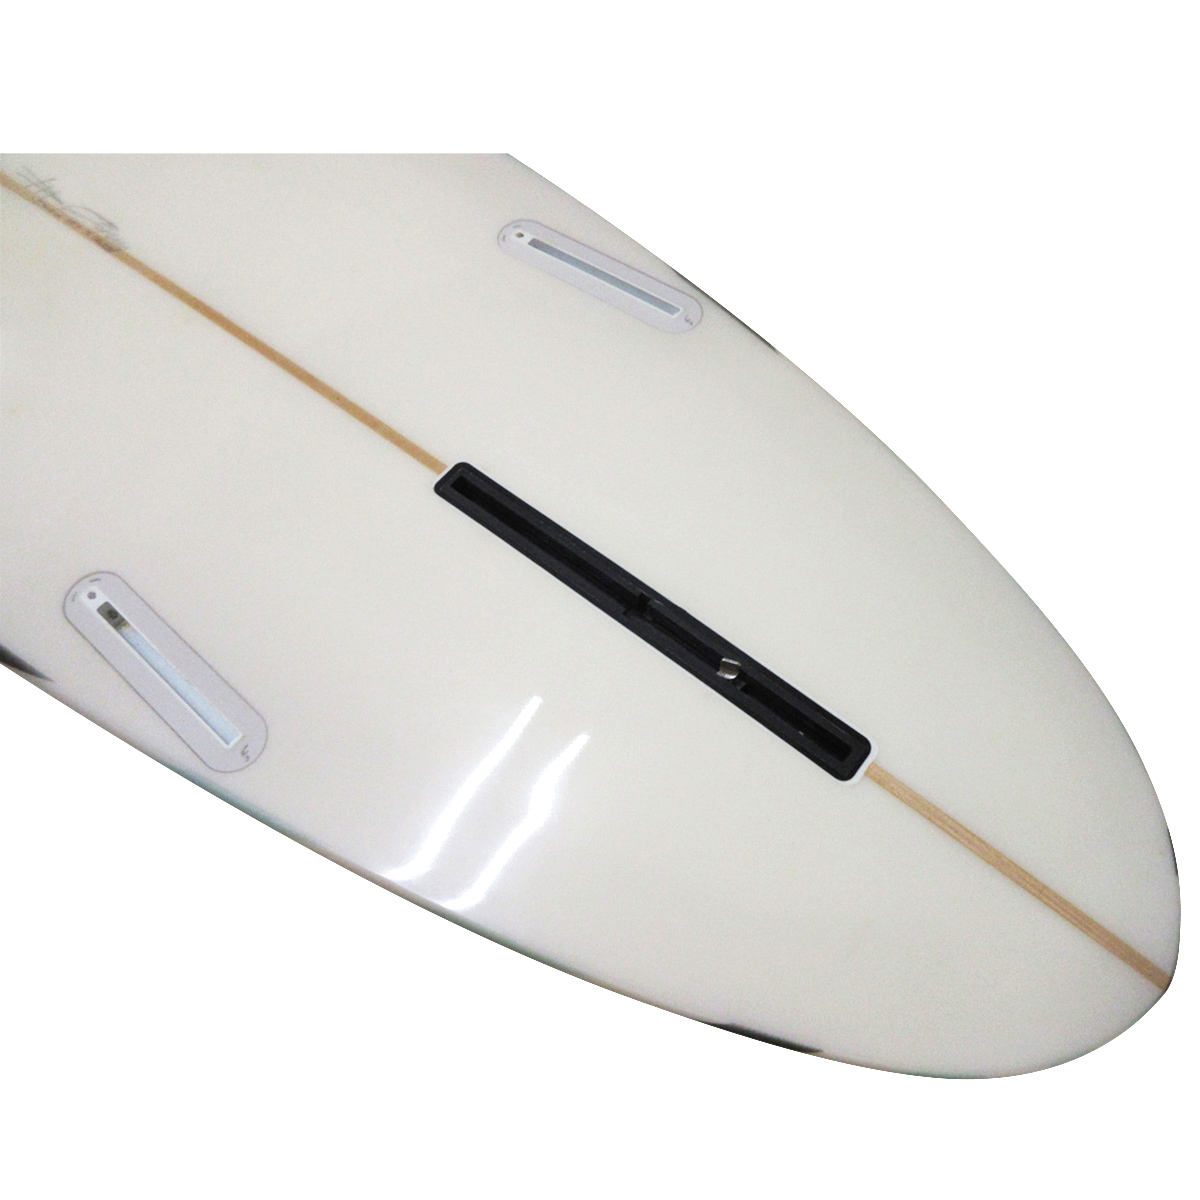 BEAR Surfboards / All-round 9`1 Shaped by Make Casey